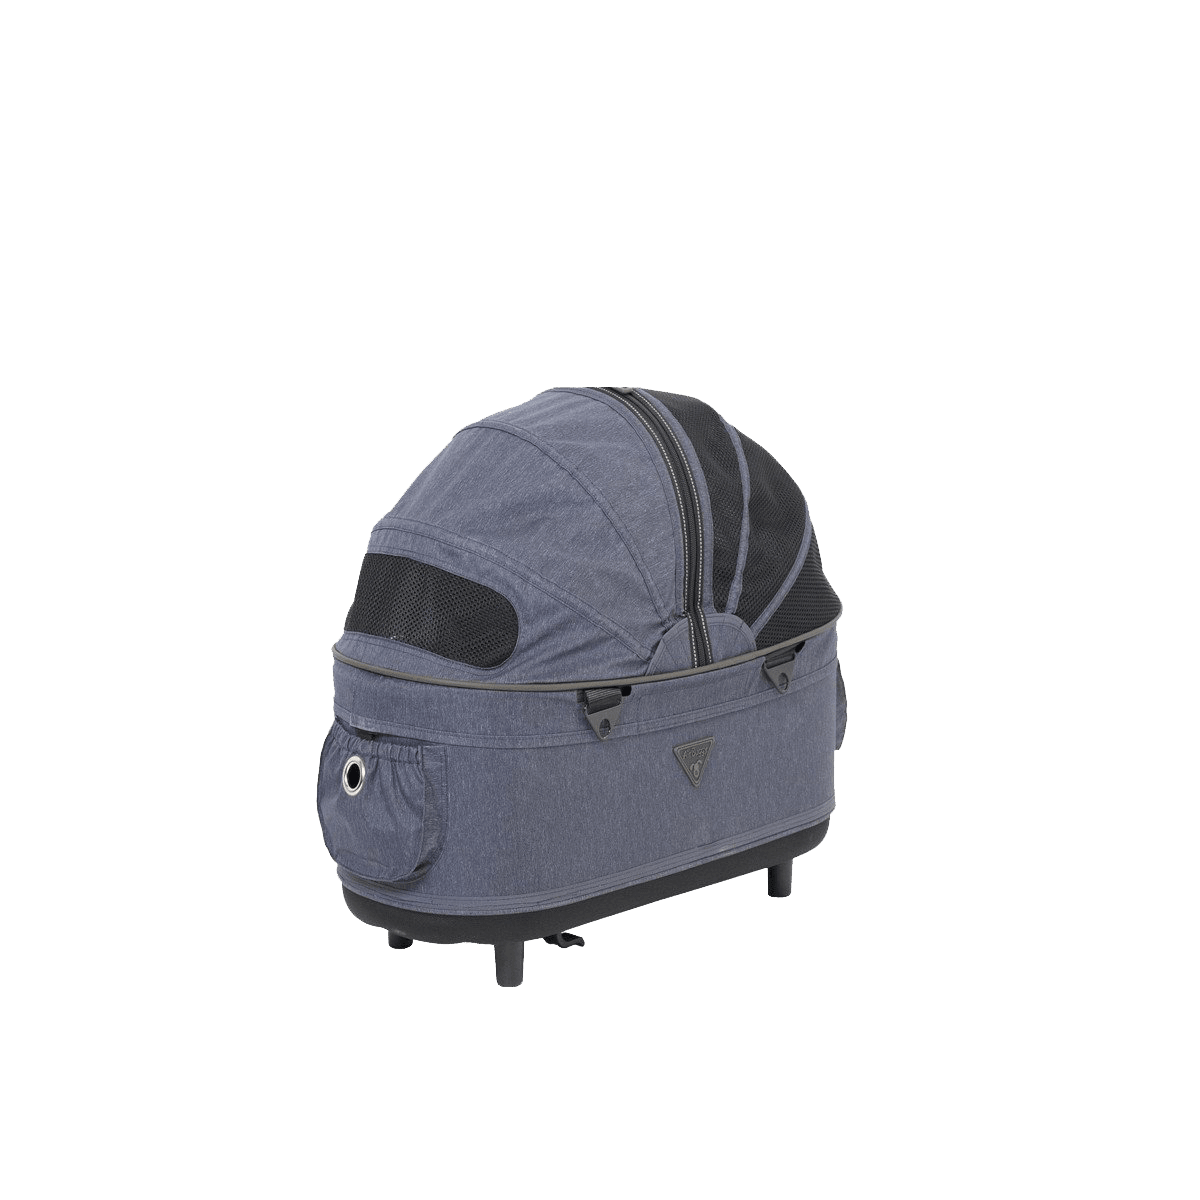 Dome 2 Cot, In Textured Denim - Rocky & Maggie's Pet Boutique and Salon